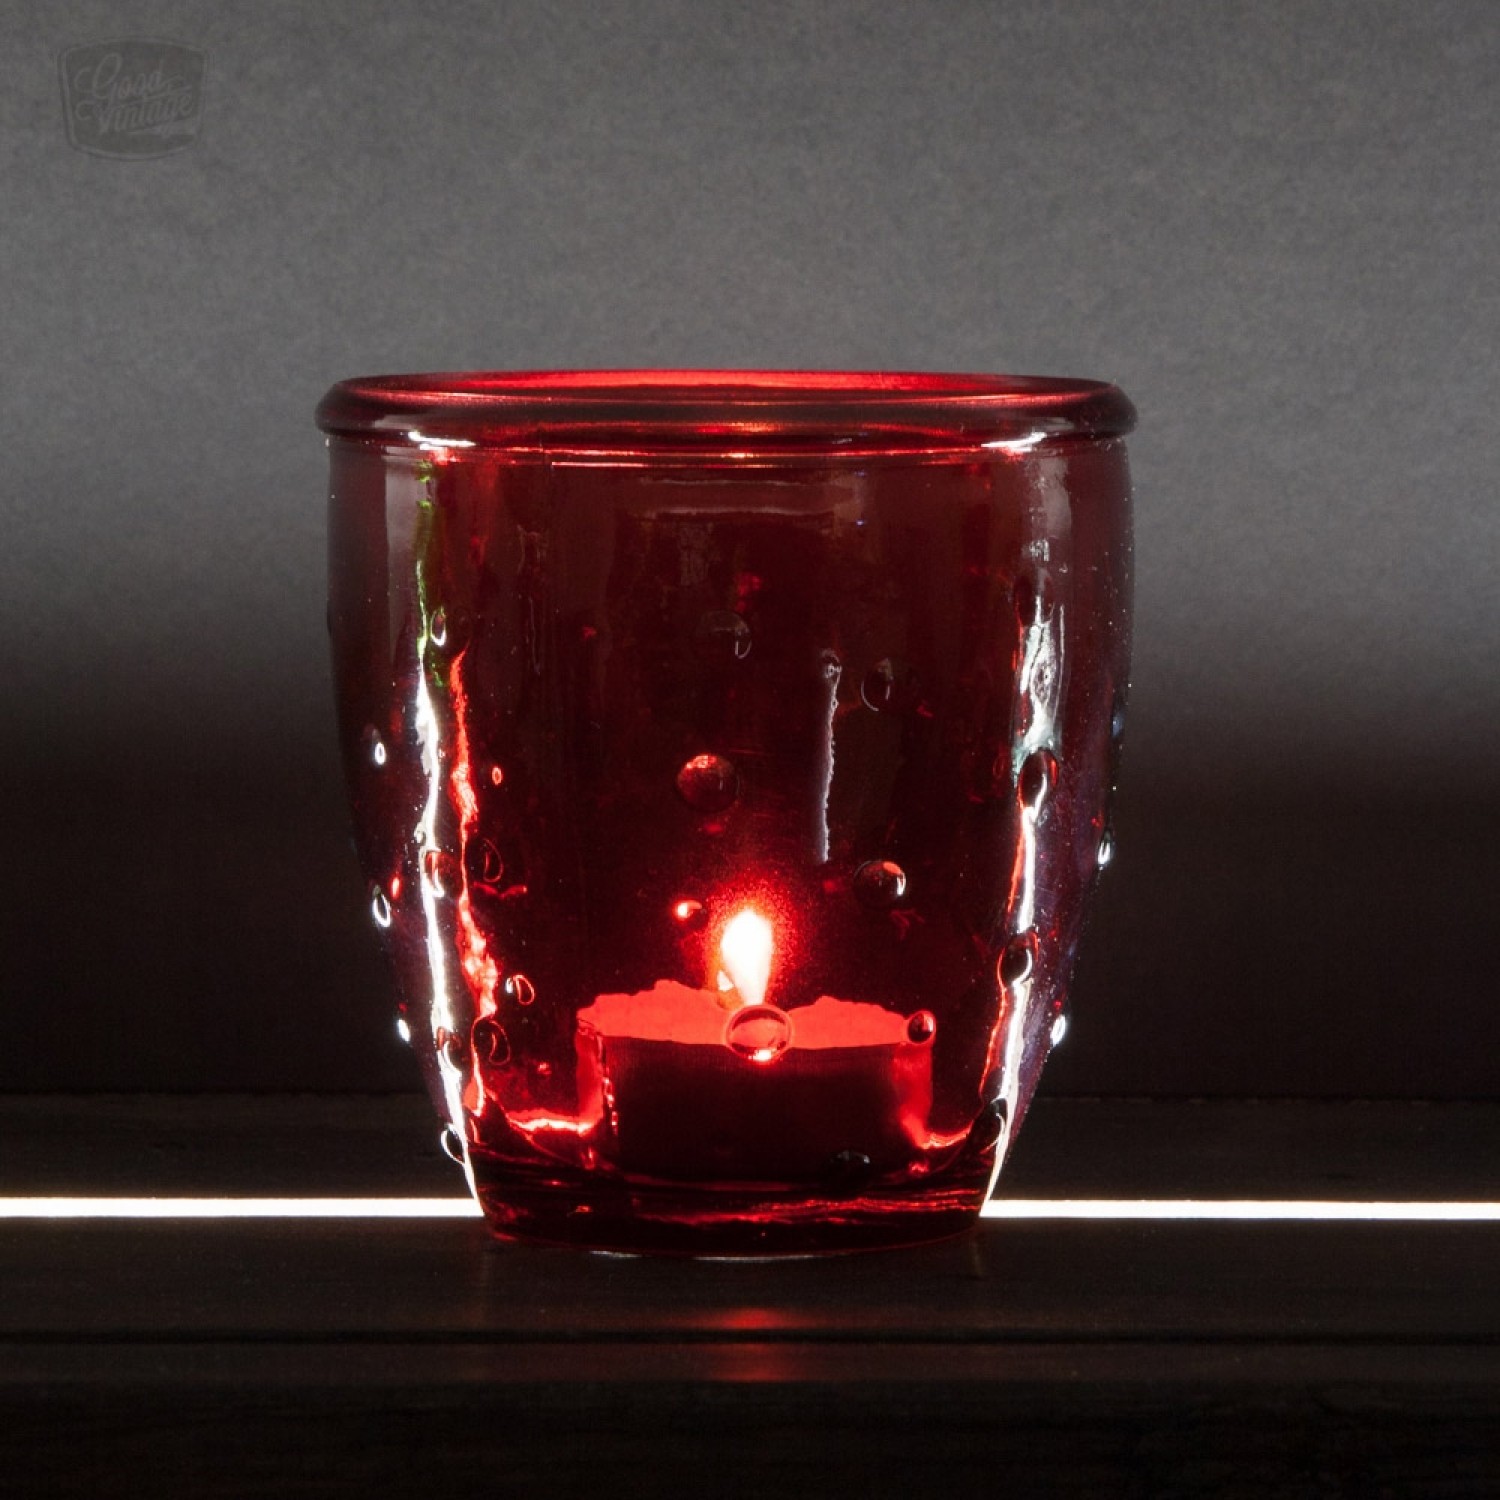 Tea-Light Holder 'Feeling' recycled glass red | VSanmiguel